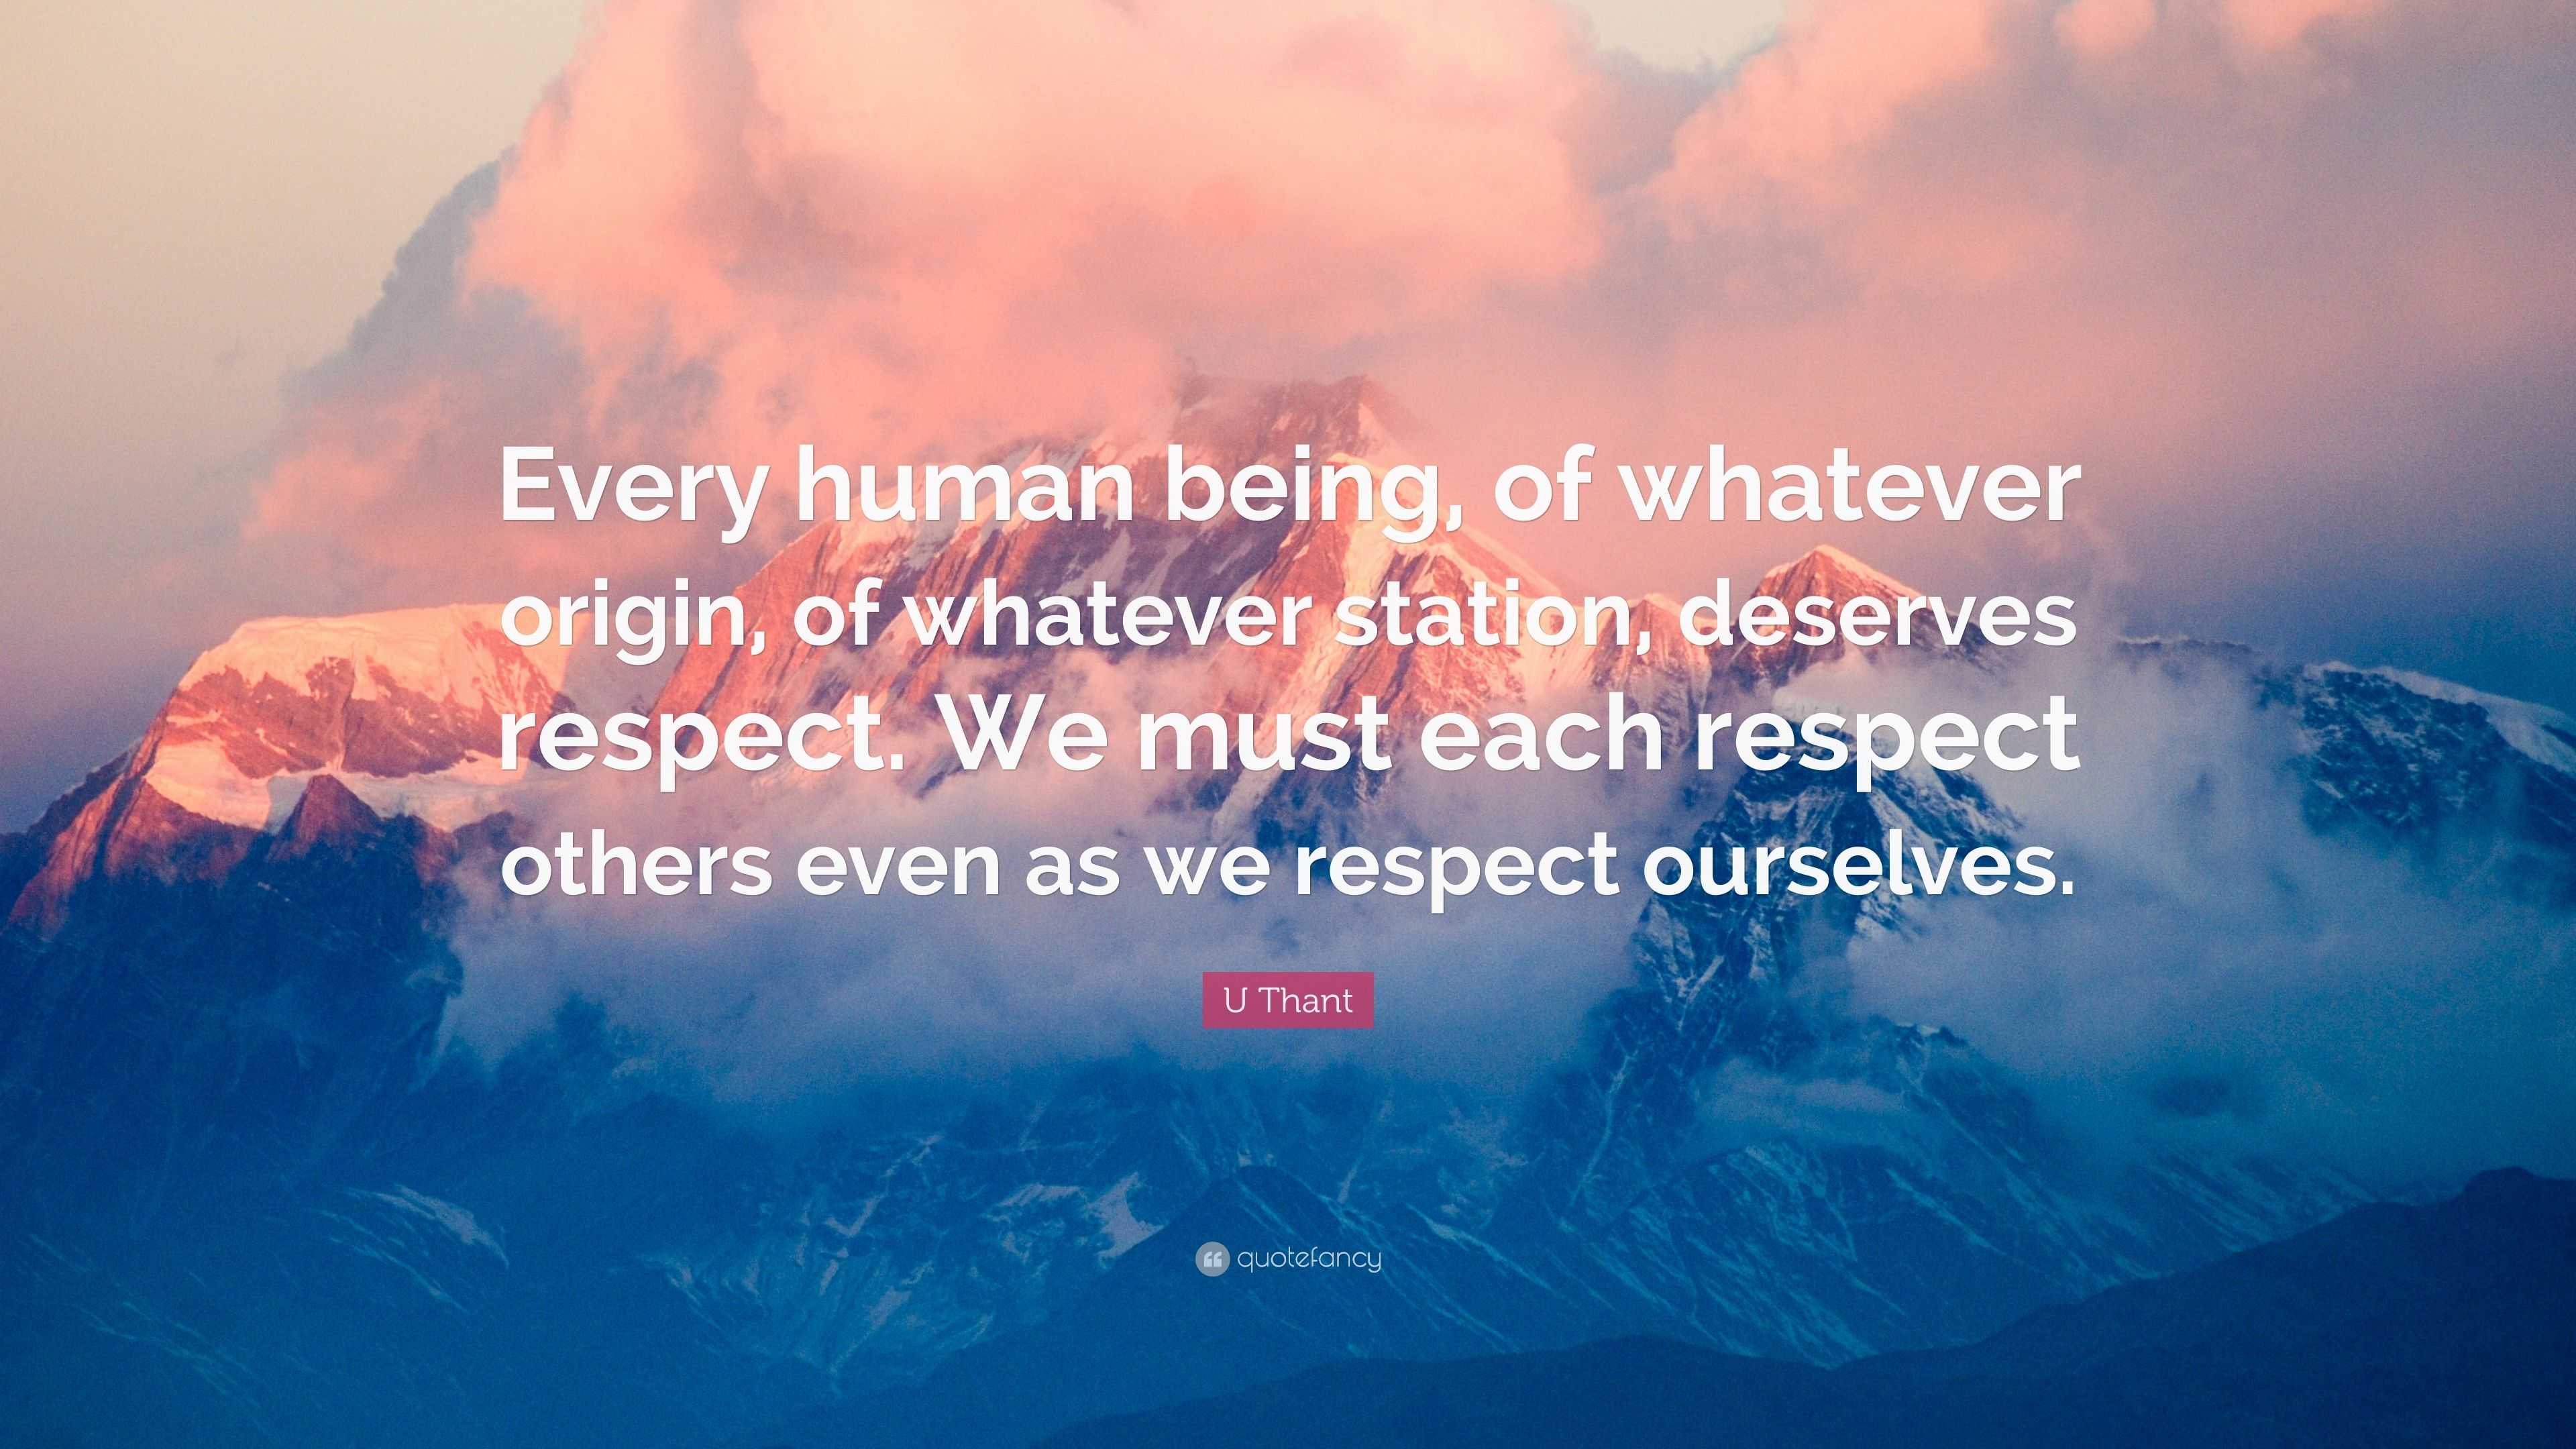 U Thant Quote: “Every human being, of whatever origin, of whatever station,  deserves respect. We must each respect others even as we res”